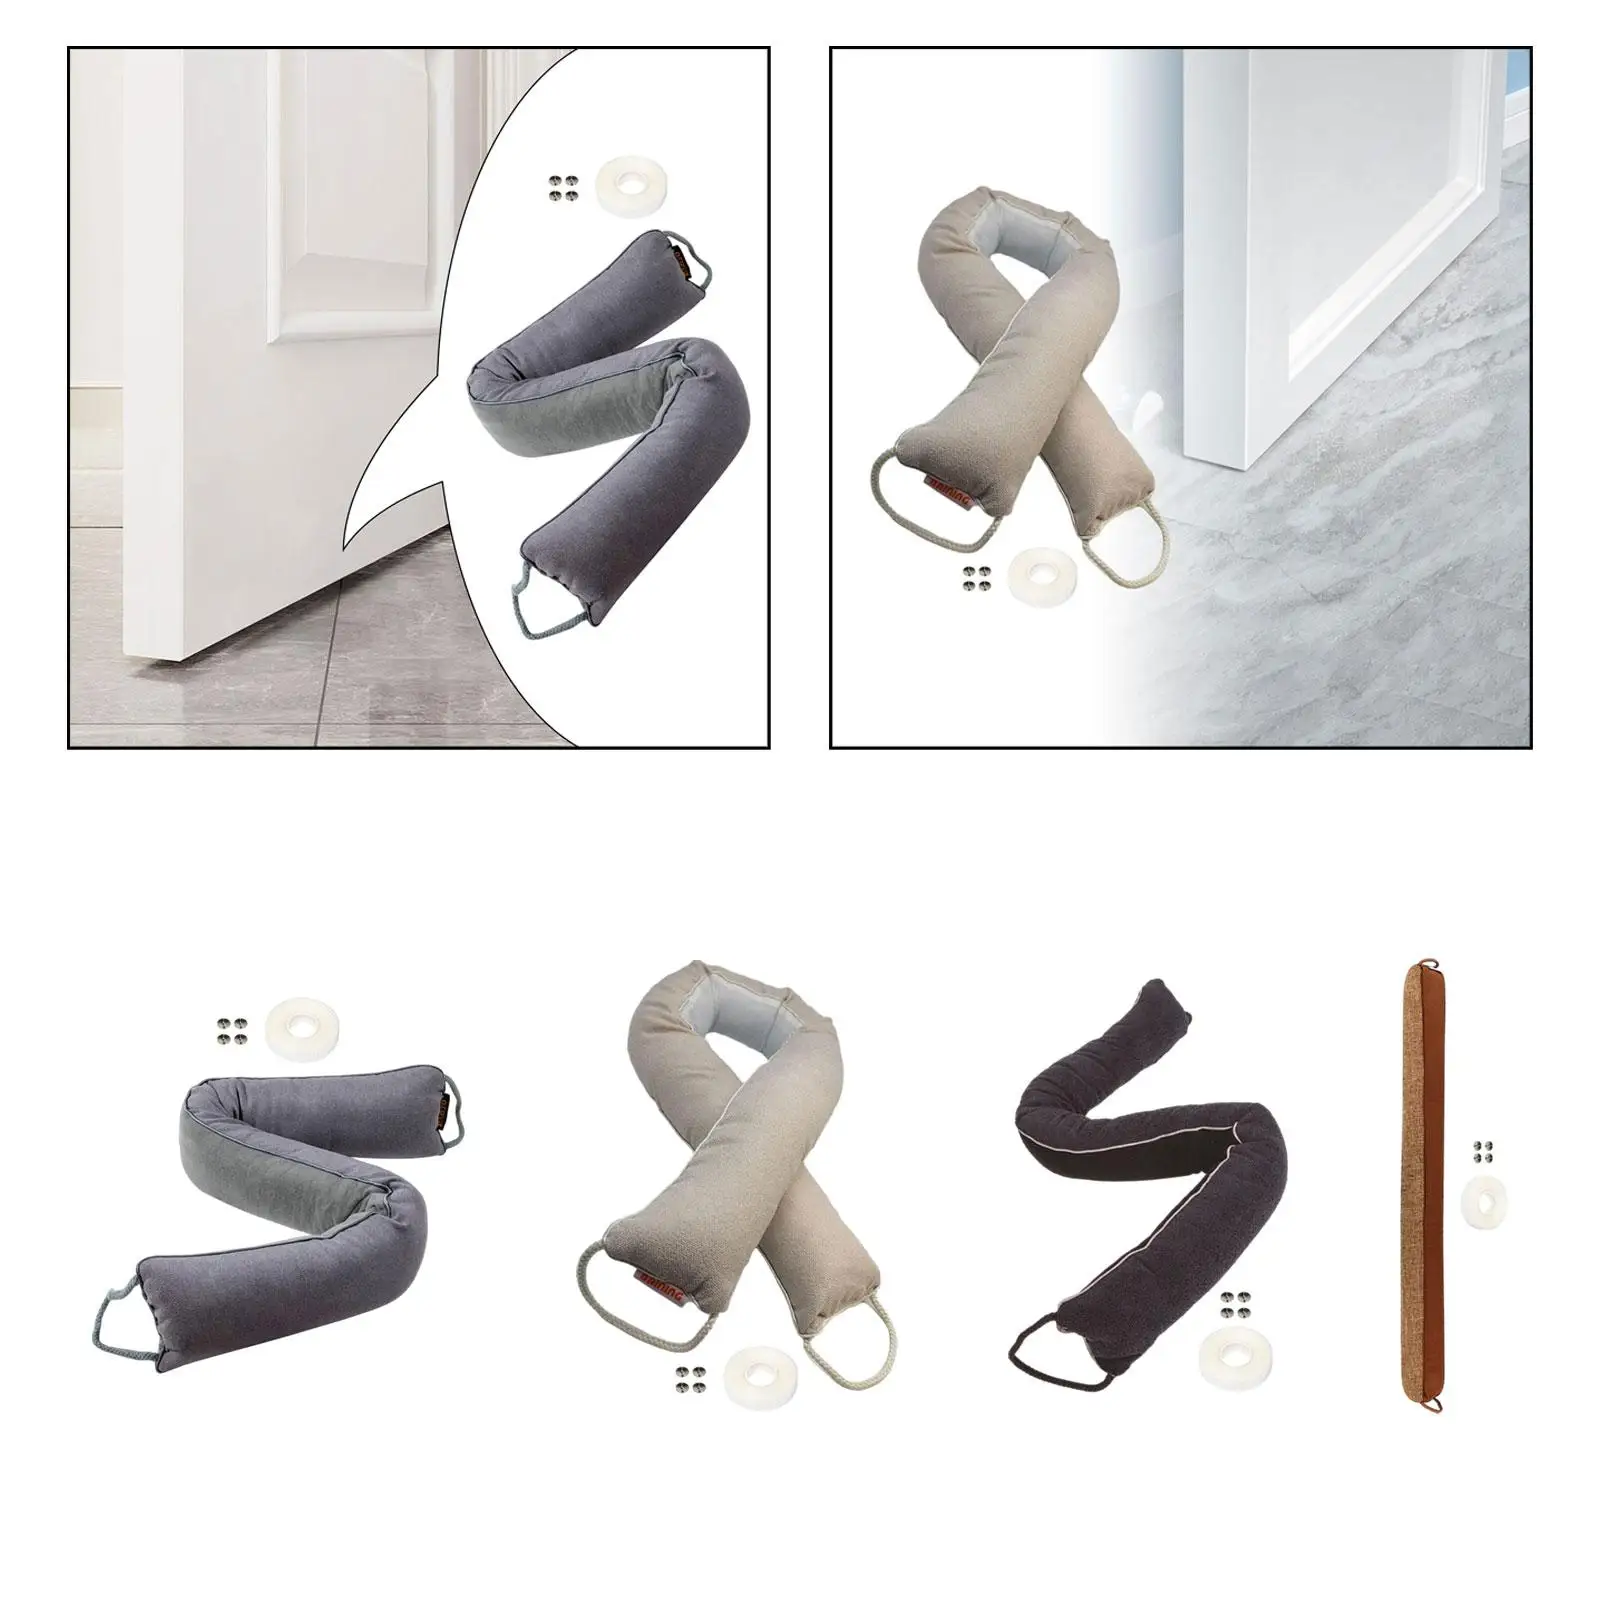 under Door Draft Stopper Protection Dust and Noise Insulation Economical Weather Seal Strip Easy to Install Door Protect